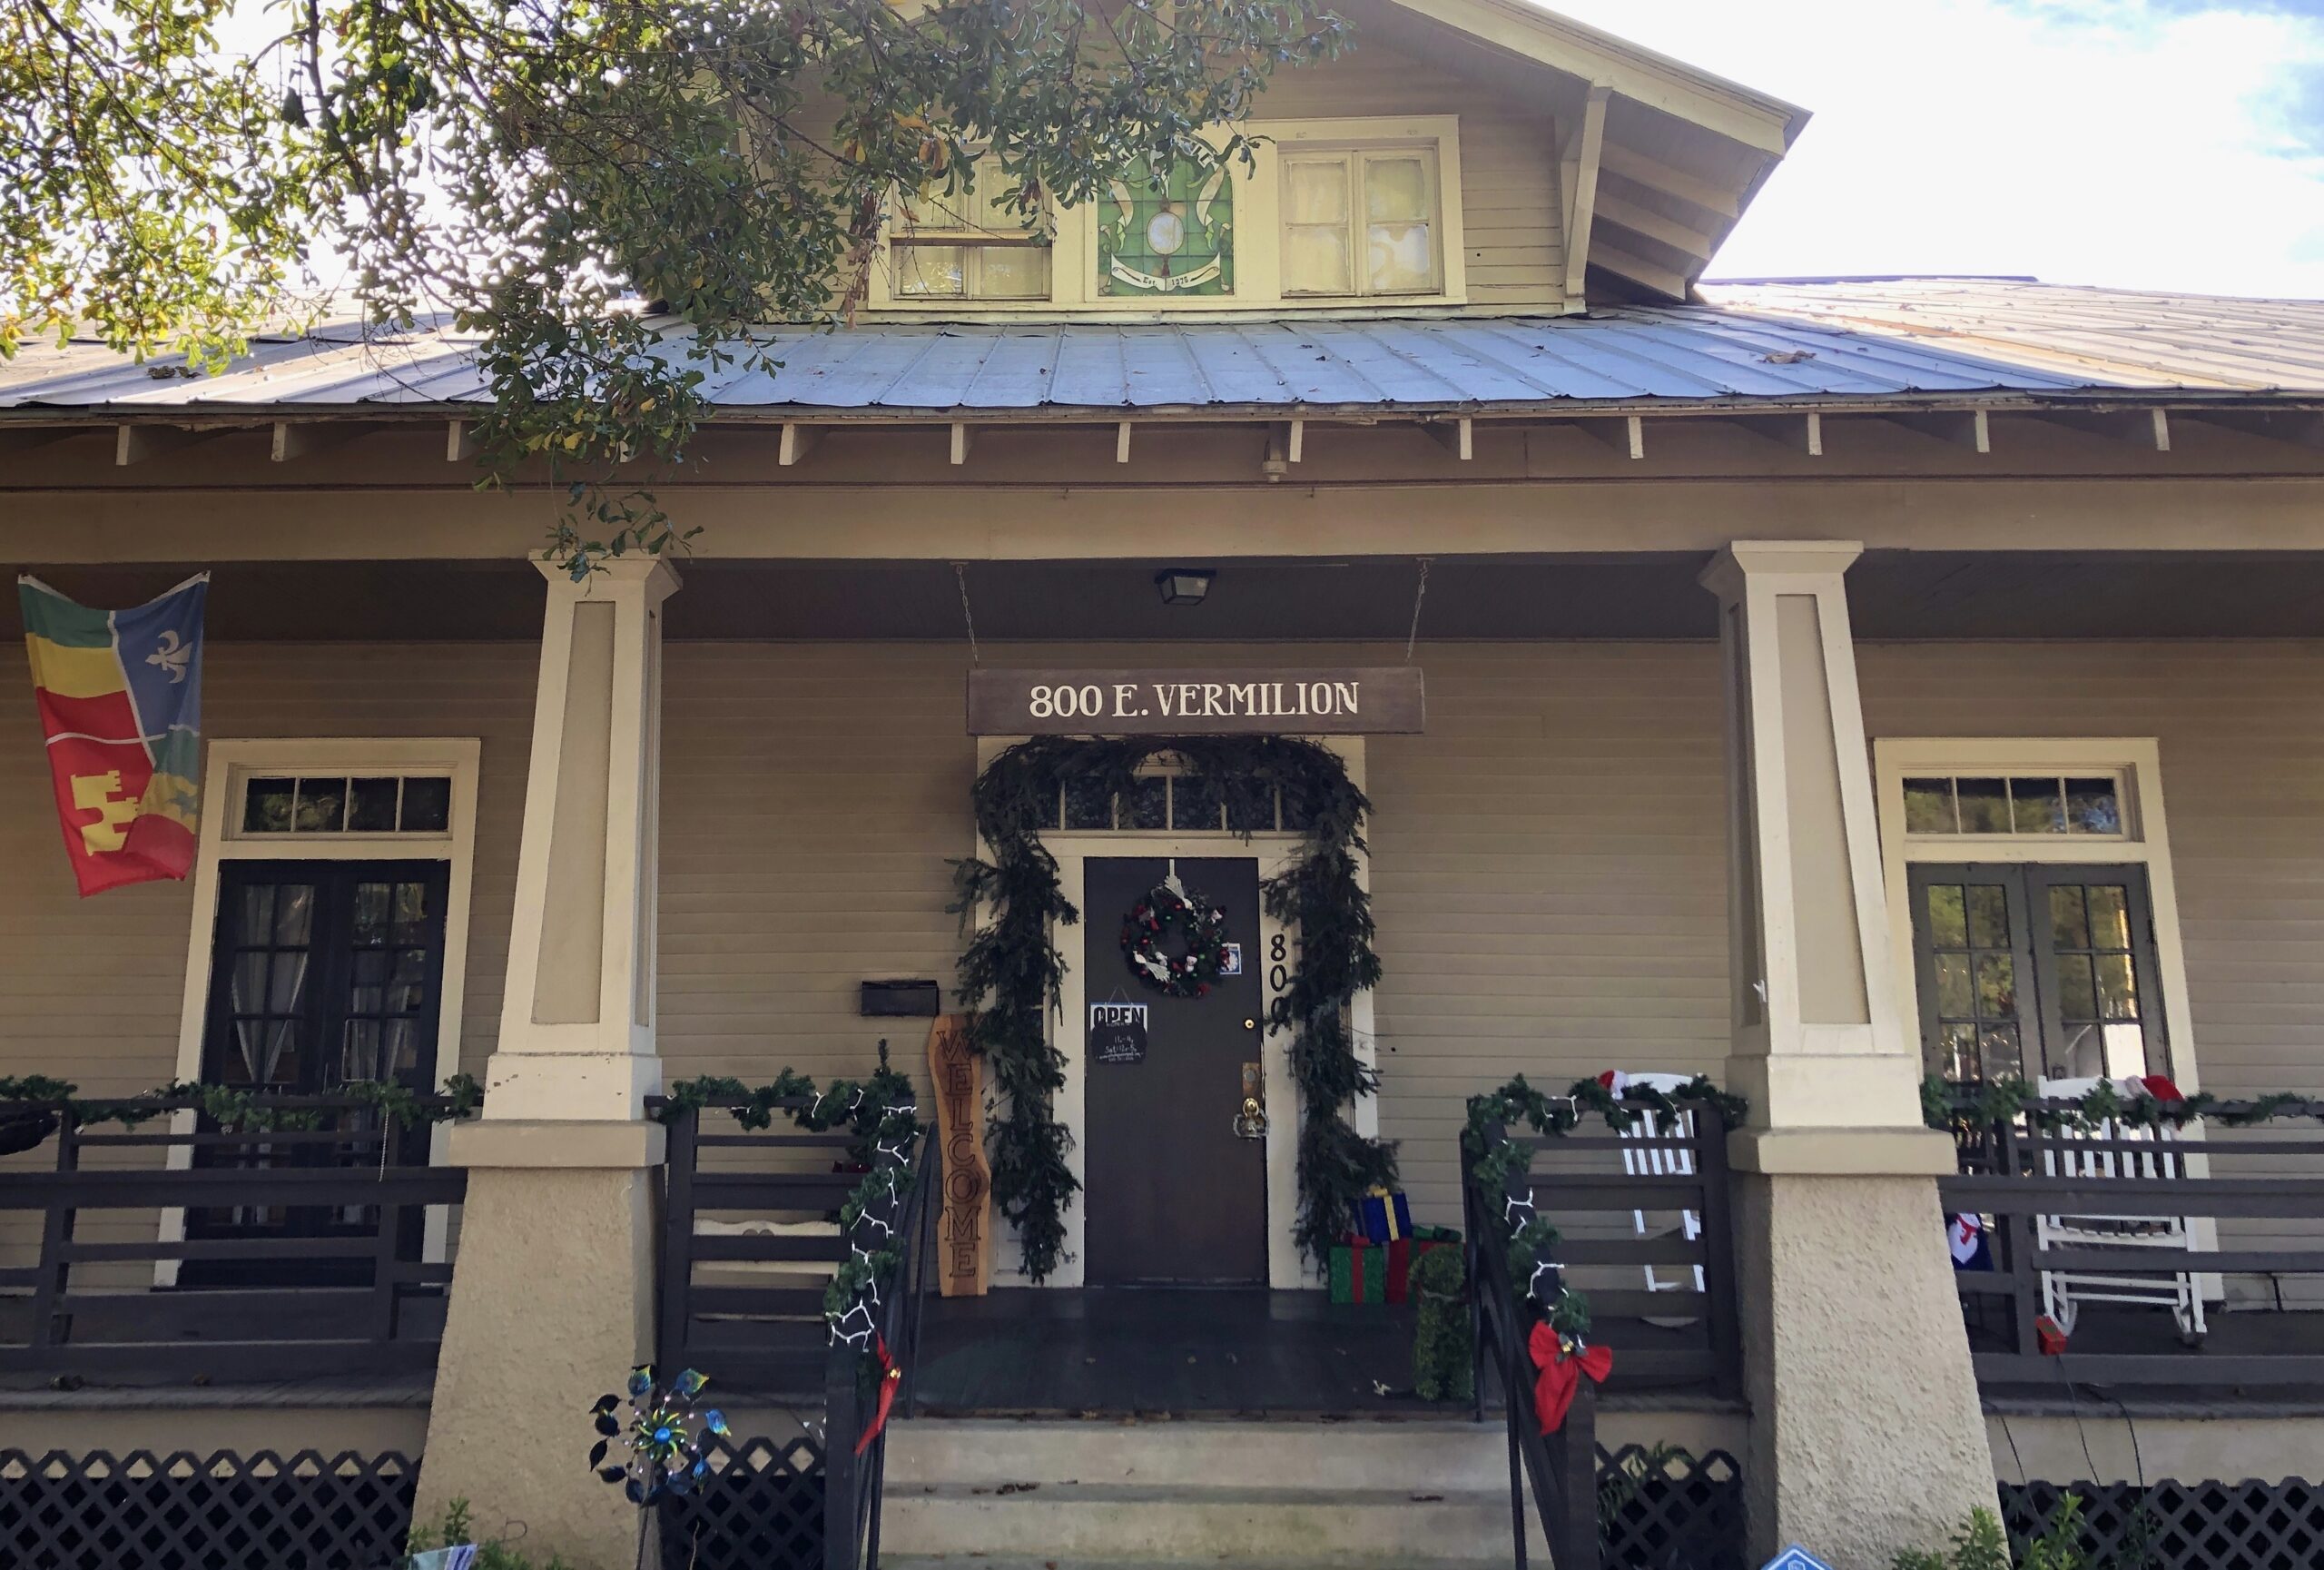 Maison Creole, the first Black history museum in Lafayette, Louisiana, has been instrumental in making sure the community’s oral history is shared with StoryCorps, the national nonprofit that collects Americans’ accounts of life. Photo credit: Quinn Foster, NABJ Black News & Views